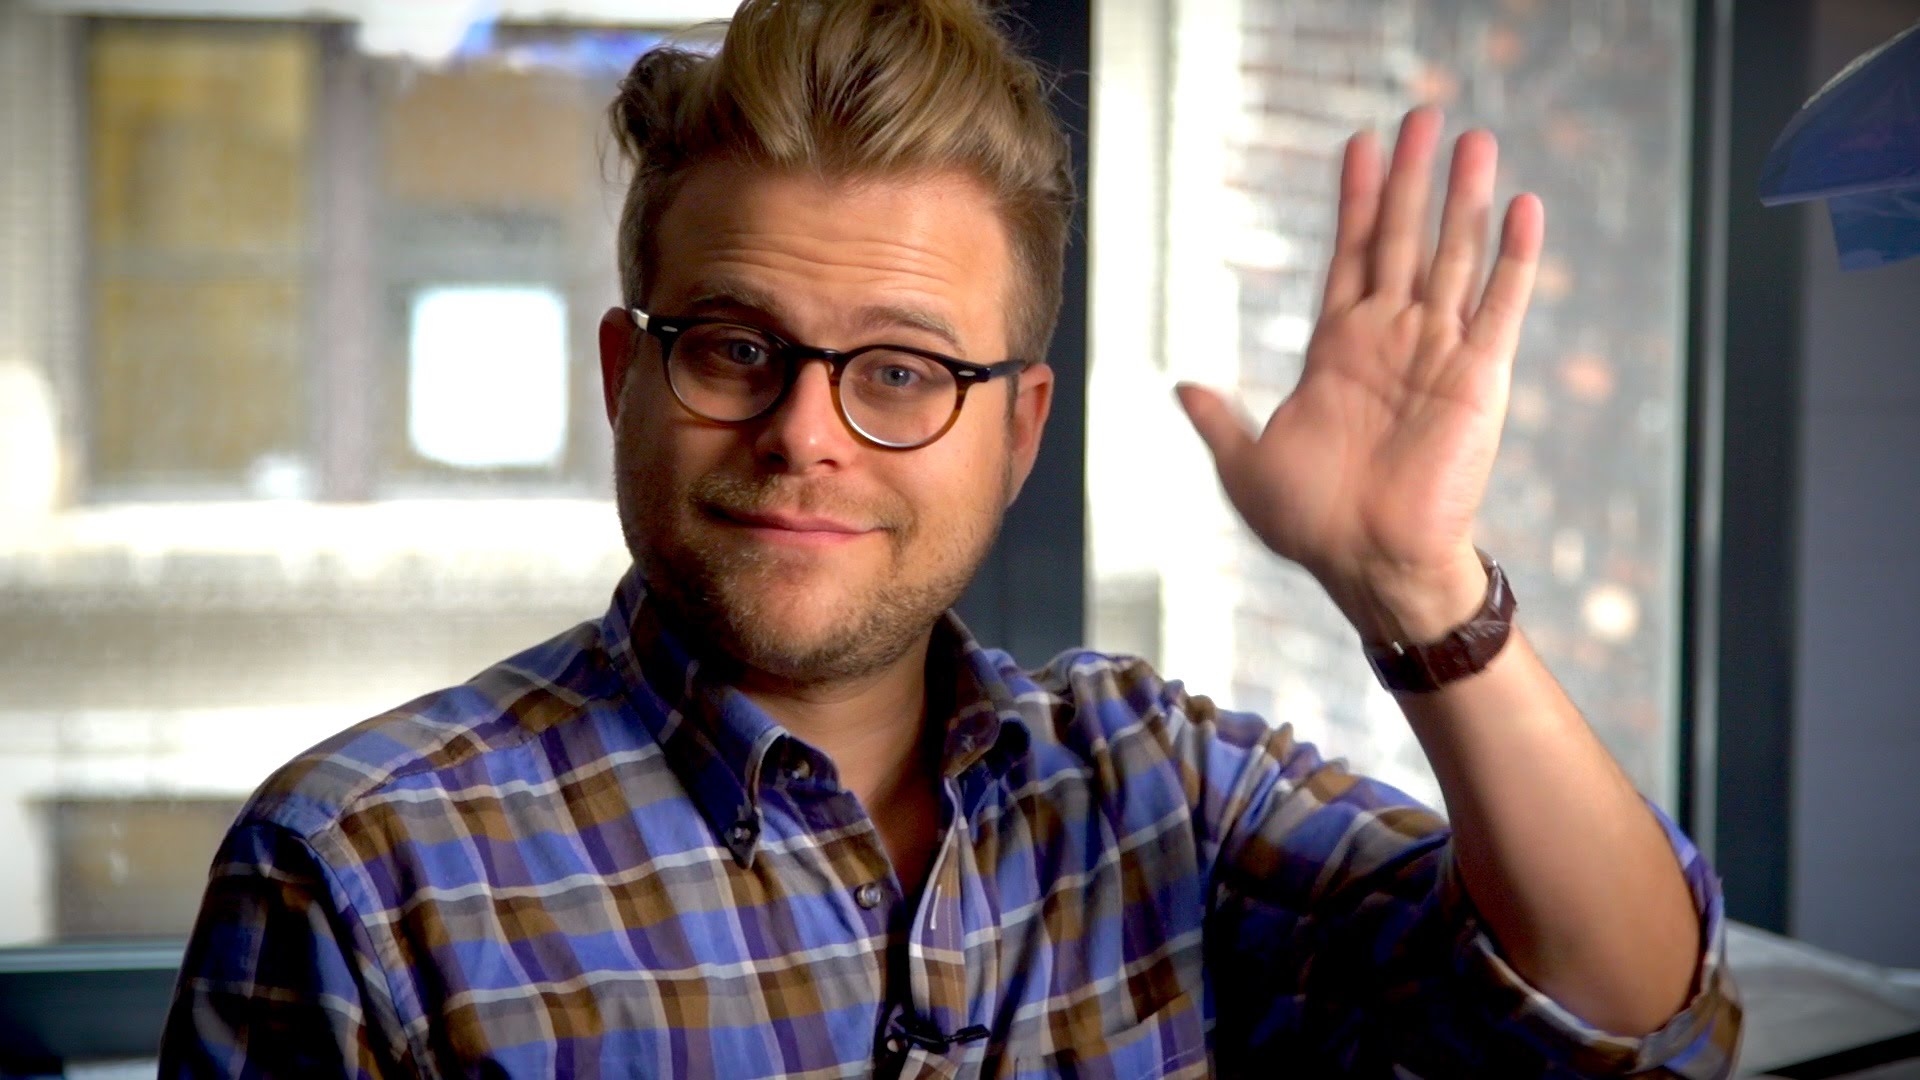 Adam Ruins Everything Wallpapers posted by Ryan Cunningham